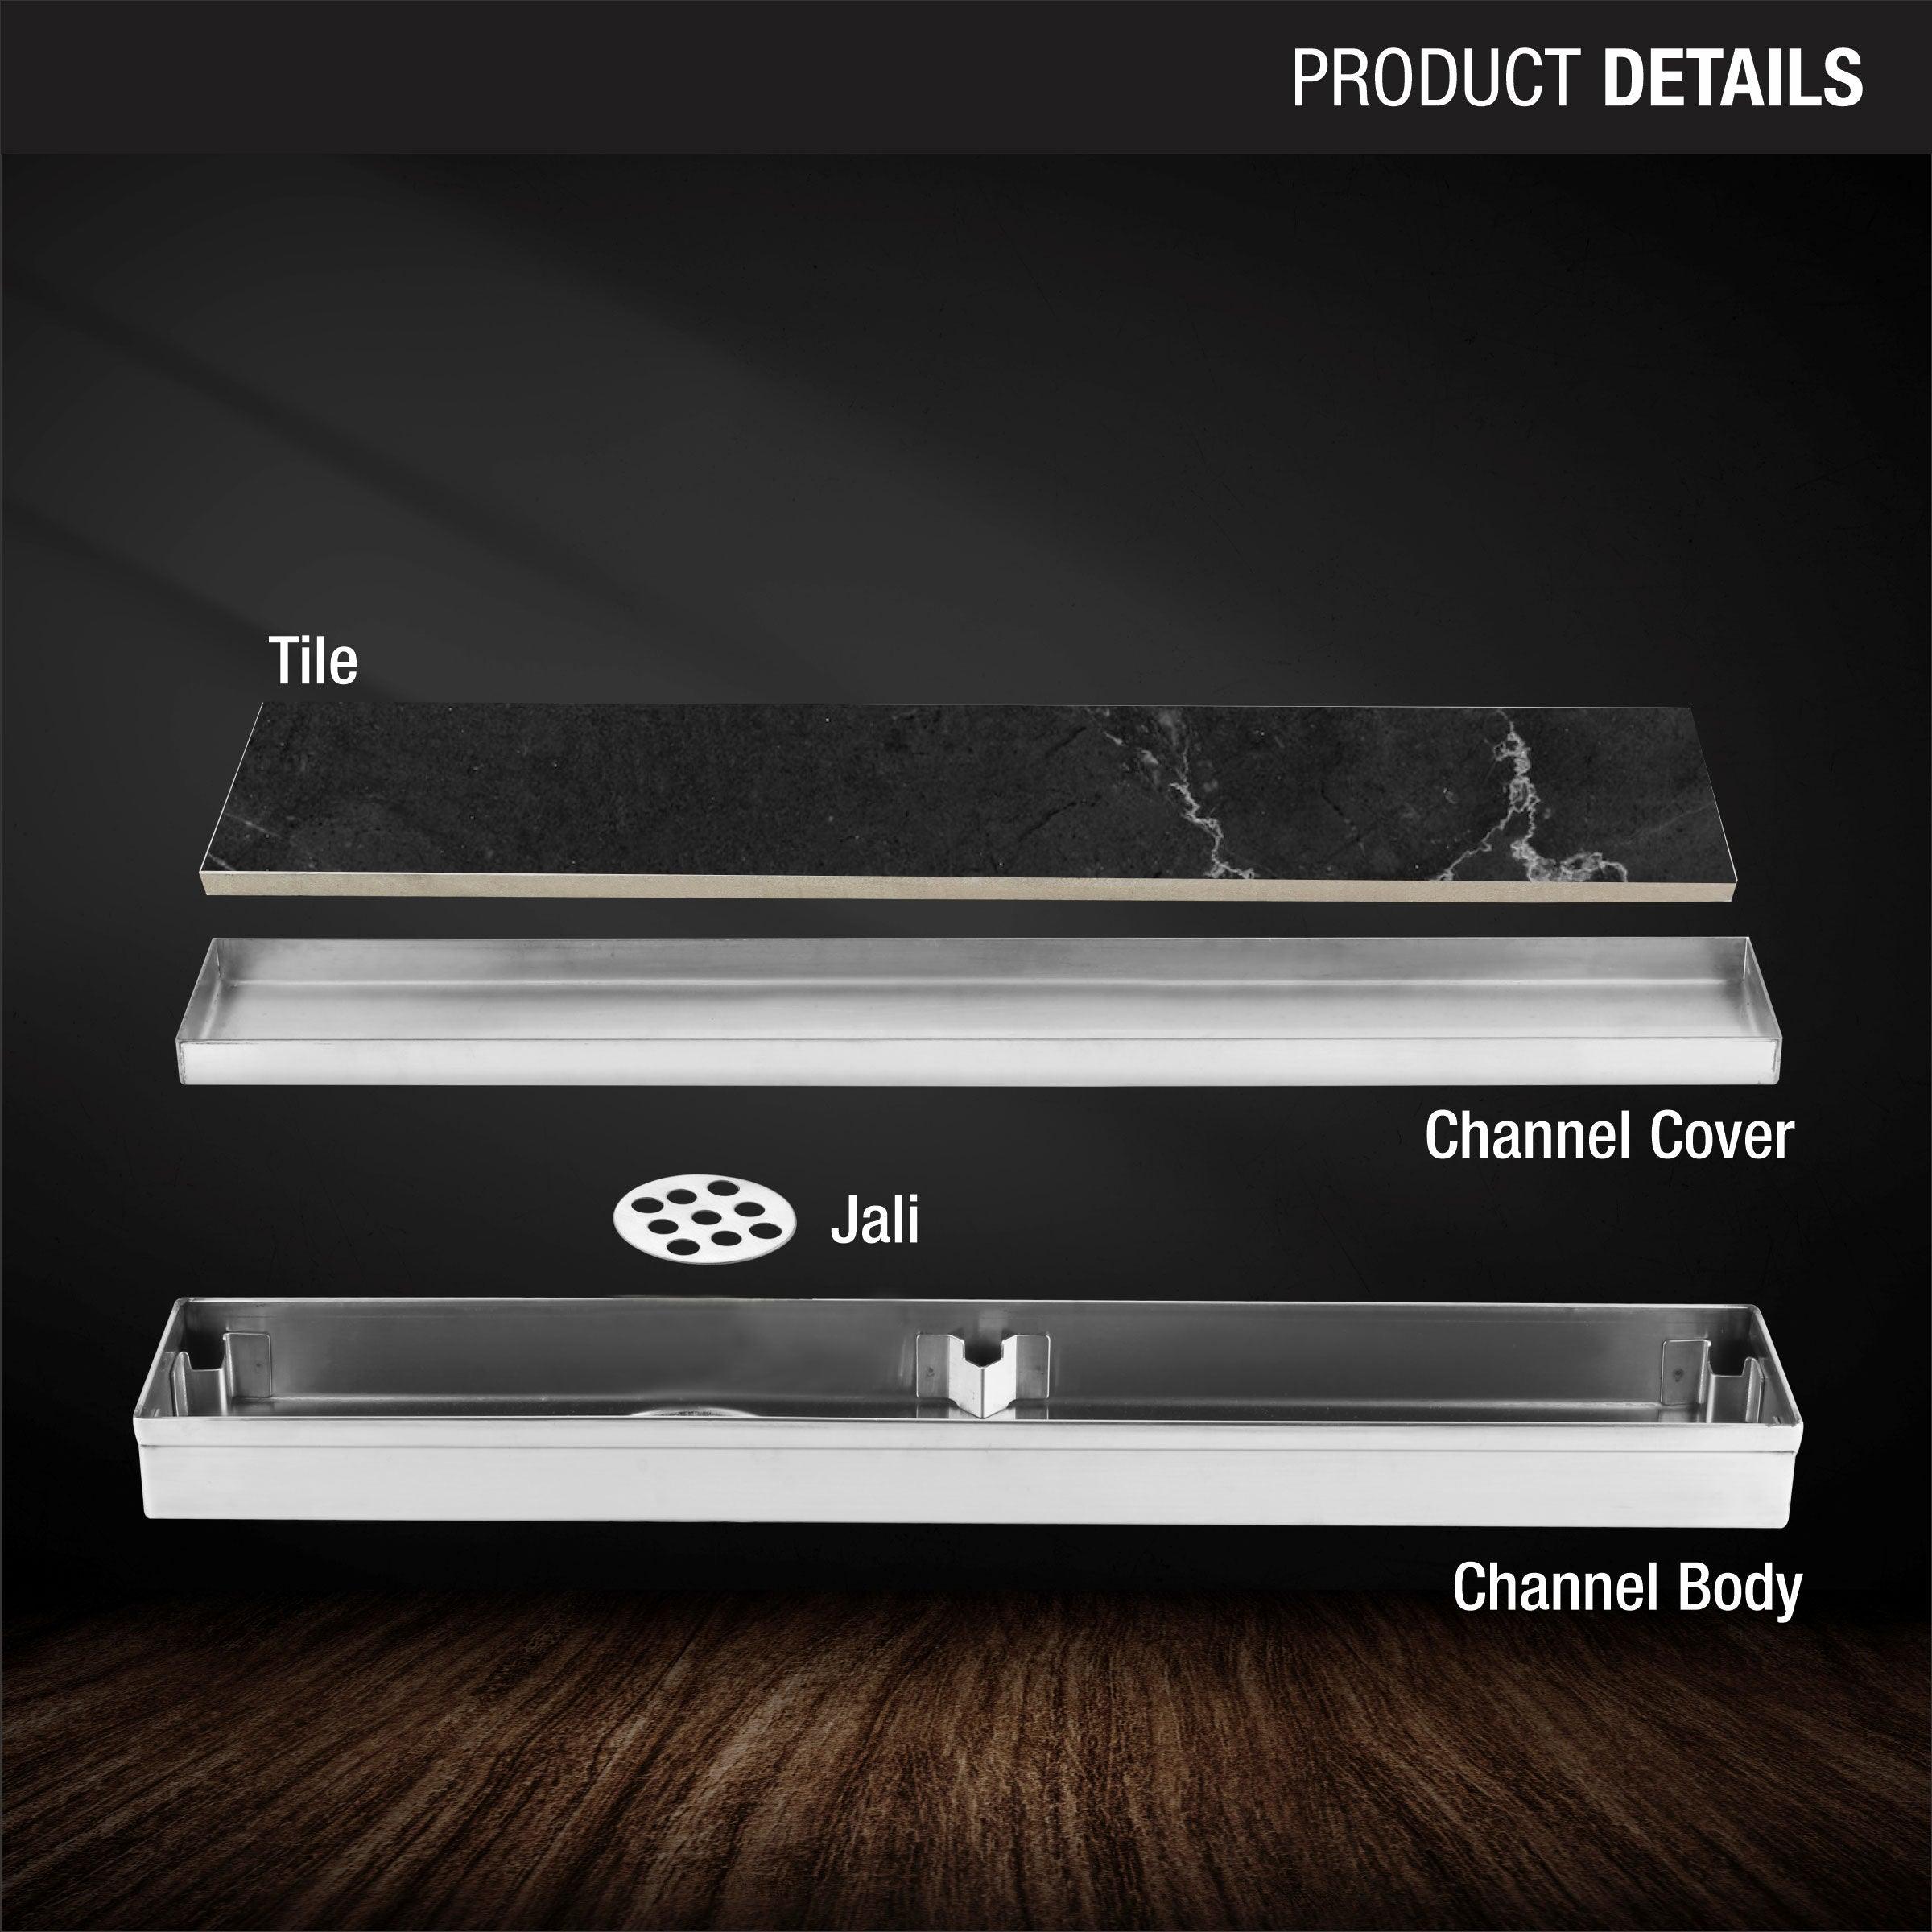 Tile Insert Shower Drain Channel (36 x 2 Inches) product details